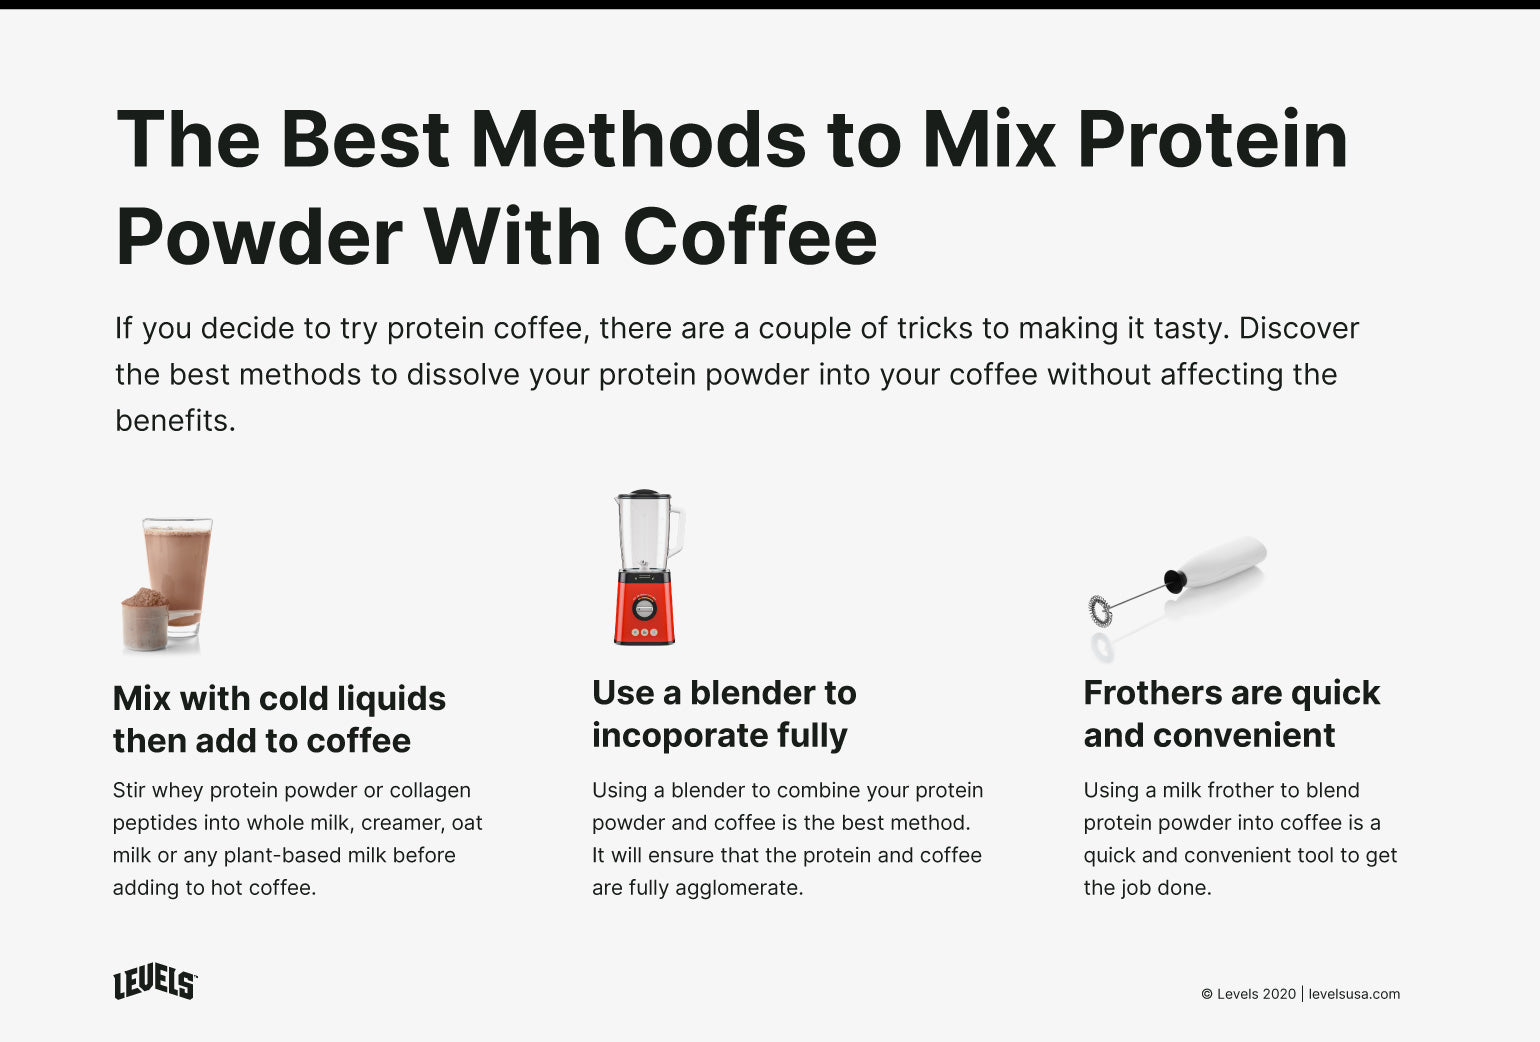 How To Blend Protein Powder In Coffee - The Oregon Dietitian